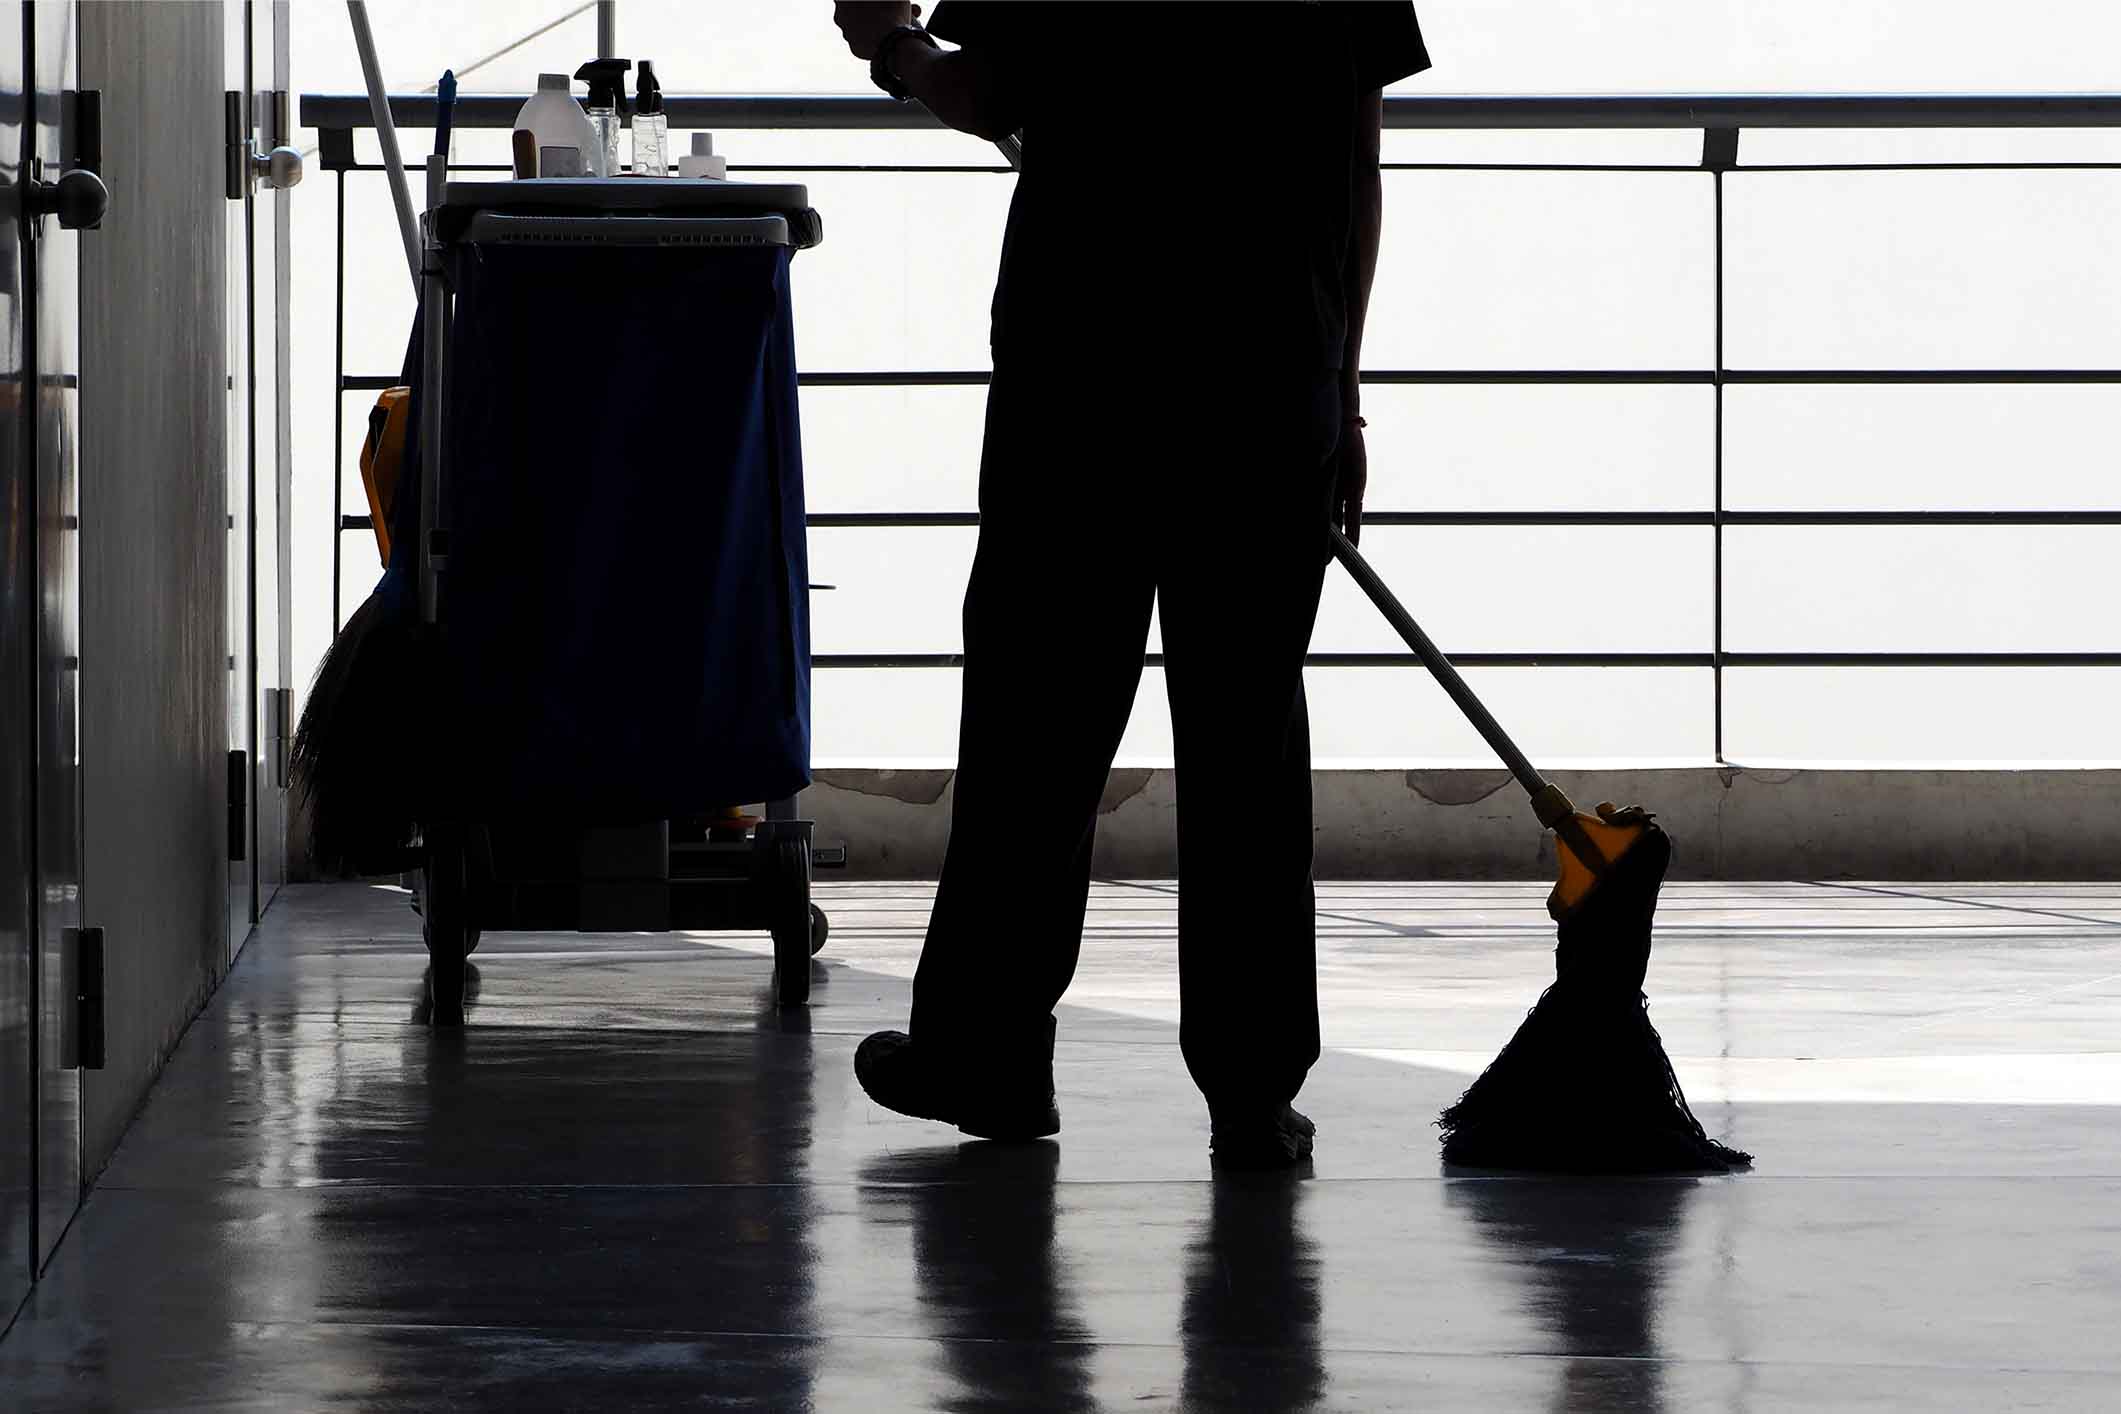 Silhouette-image-of-cleaning-service-people-sweeping-floor-with-mop-952104312_2121x1414